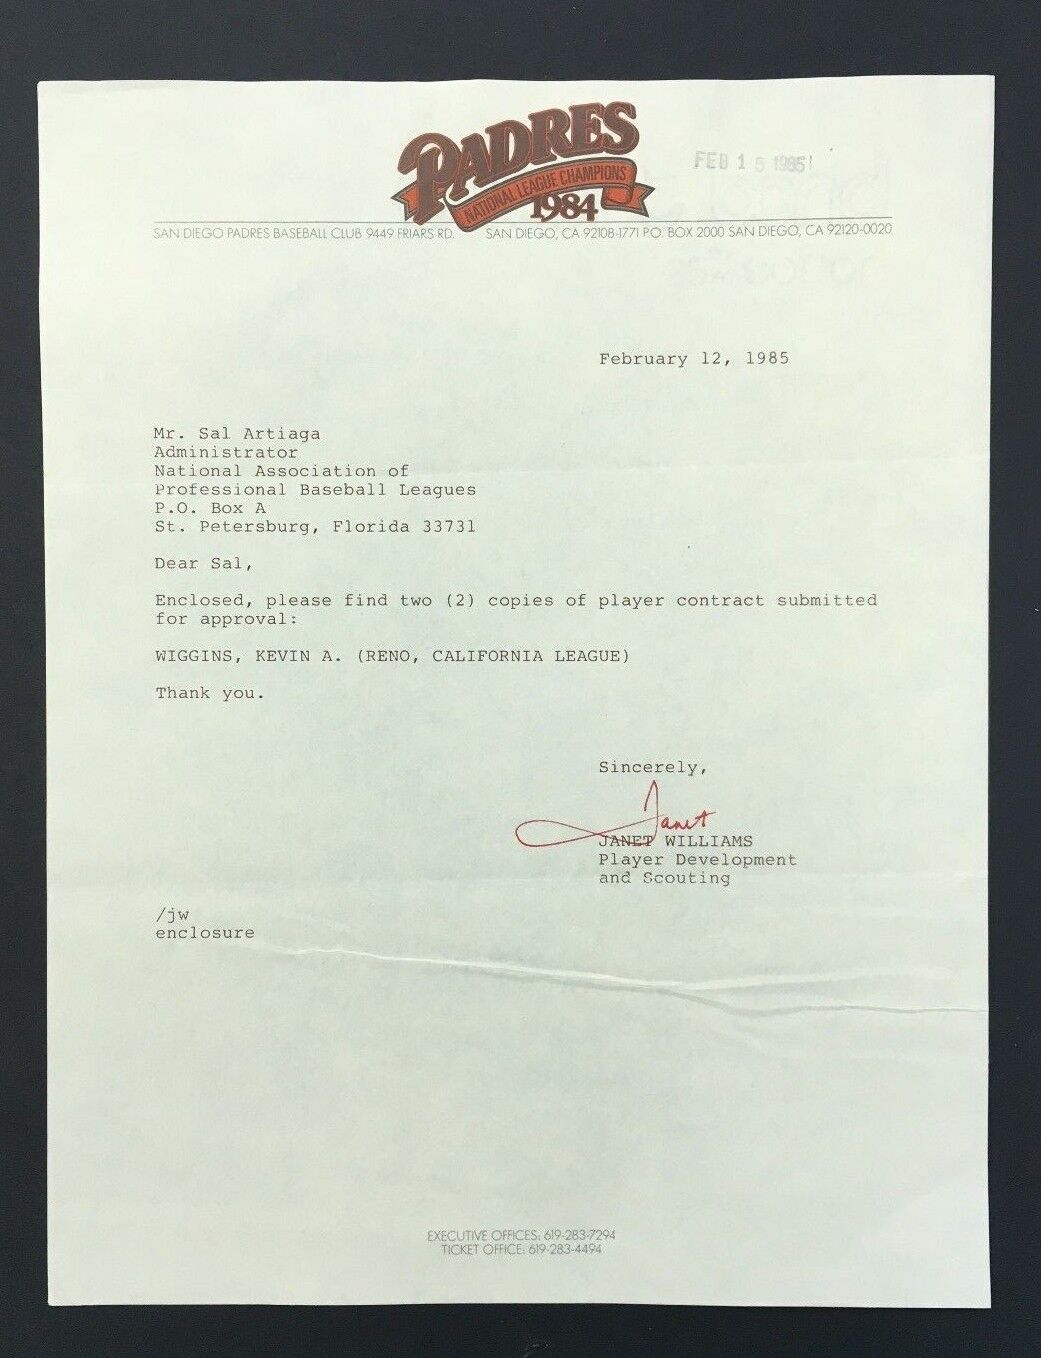 1985 San Diego Padres Letter MLB Baseball Regarding Players Contracts